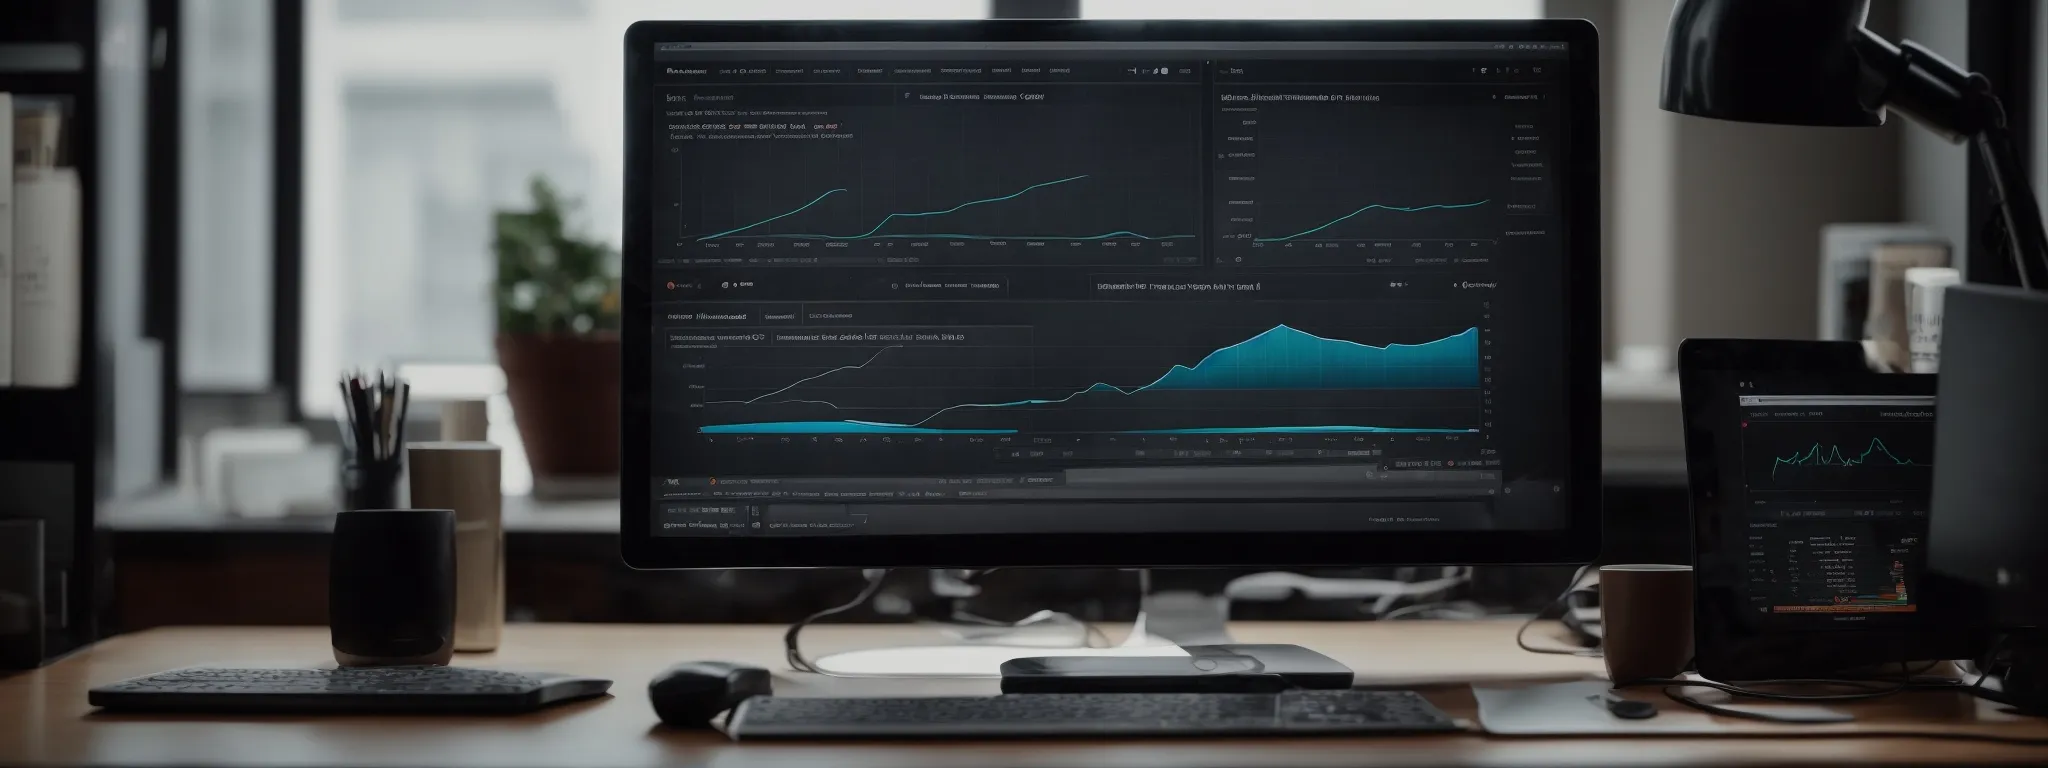 a professional desk setup with a computer displaying graphs of website traffic analytics and a highlighted icon representing premium seo tools.